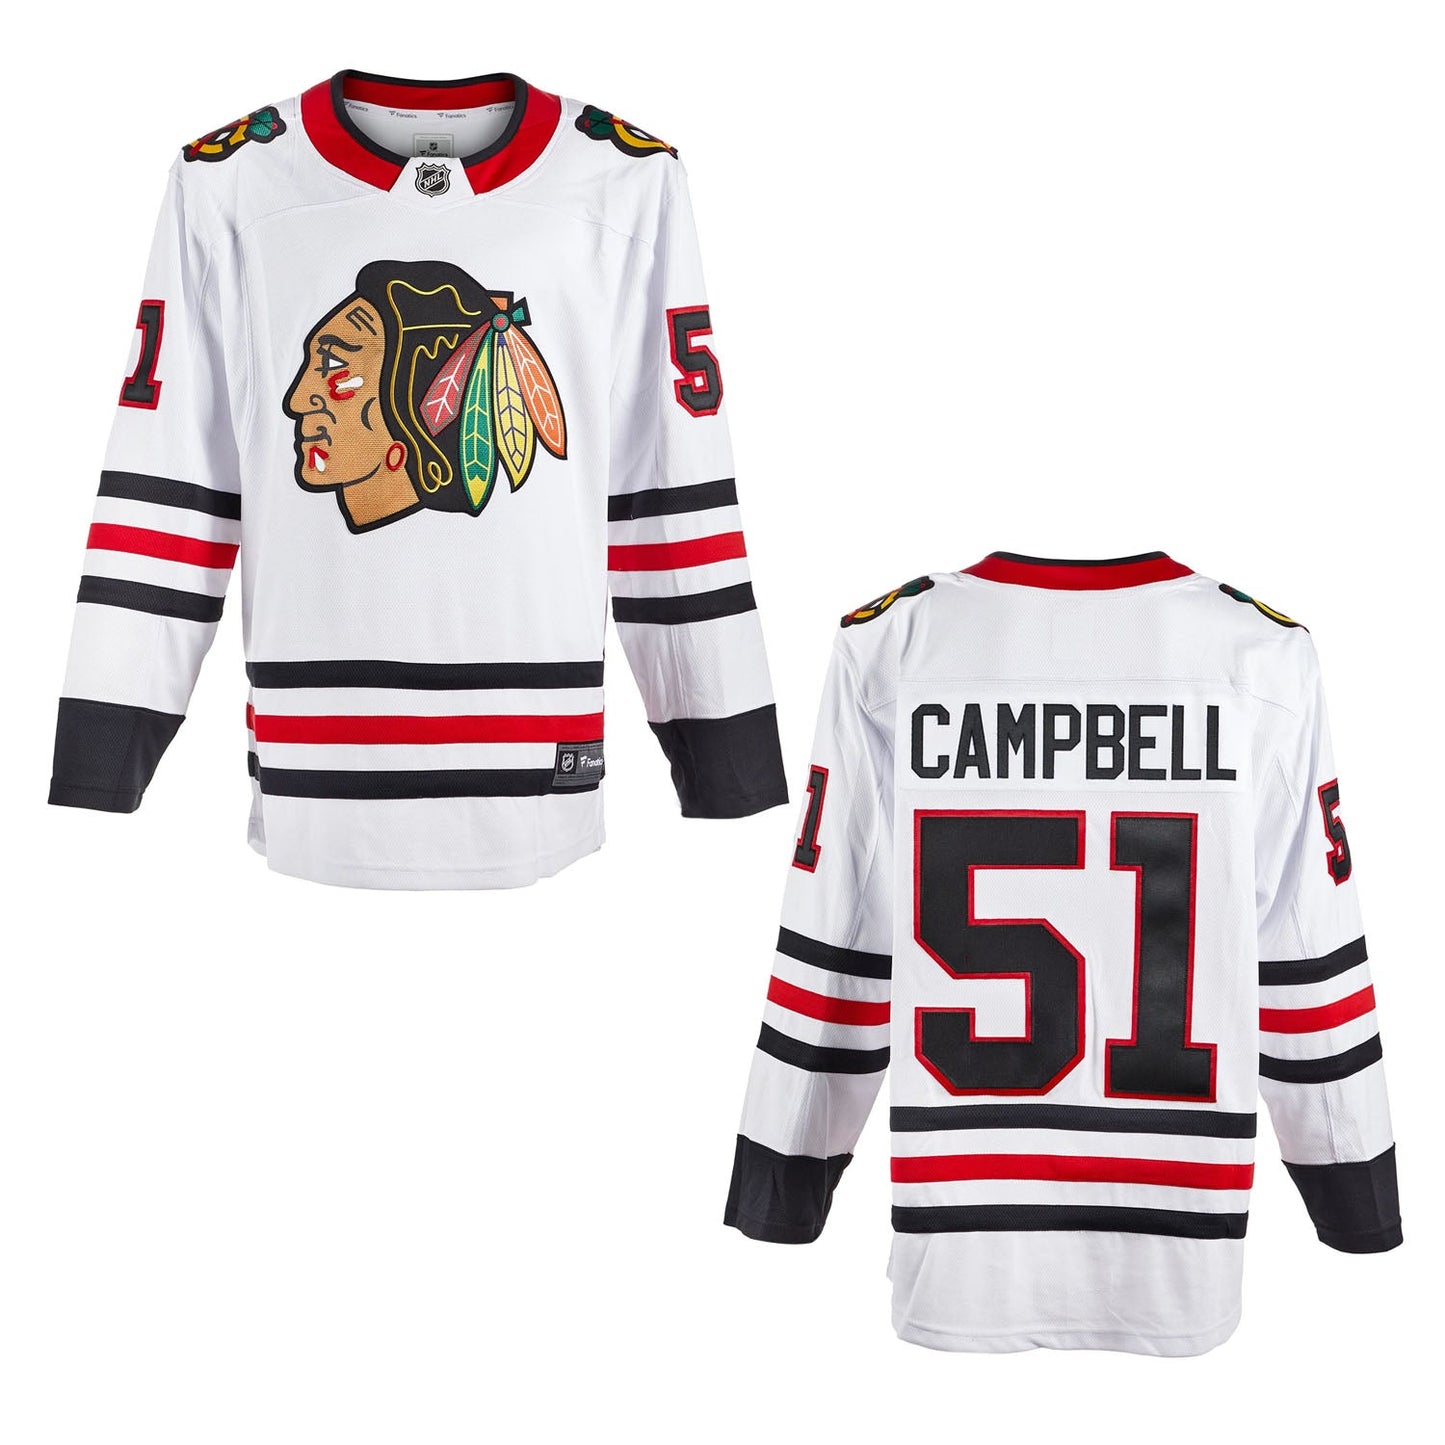 NHL Brian Campbell Chicago Blackawks 51 Jersey